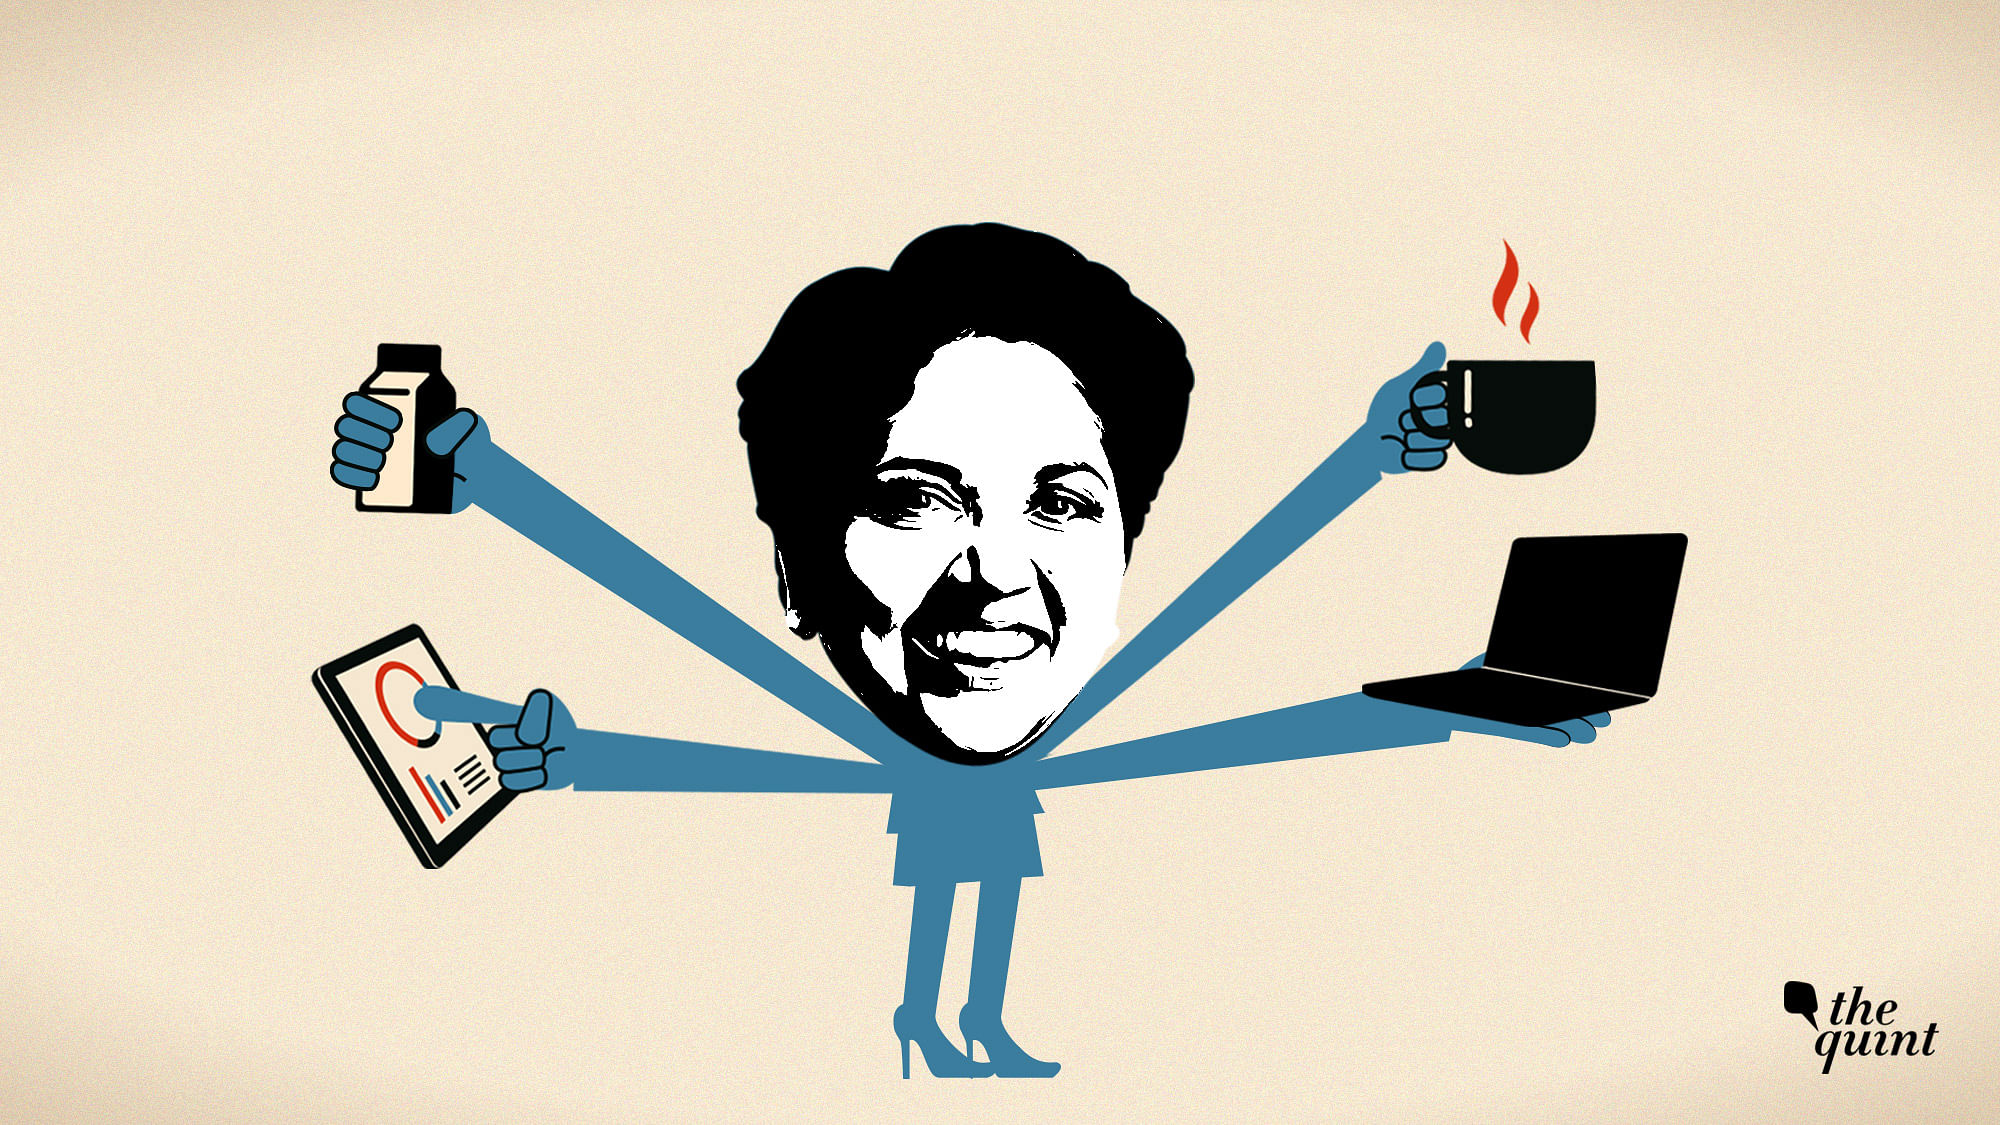 Illustration of ‘boss lady’ Indra Nooyi, former CEO of PepsiCo, used for representational purposes.